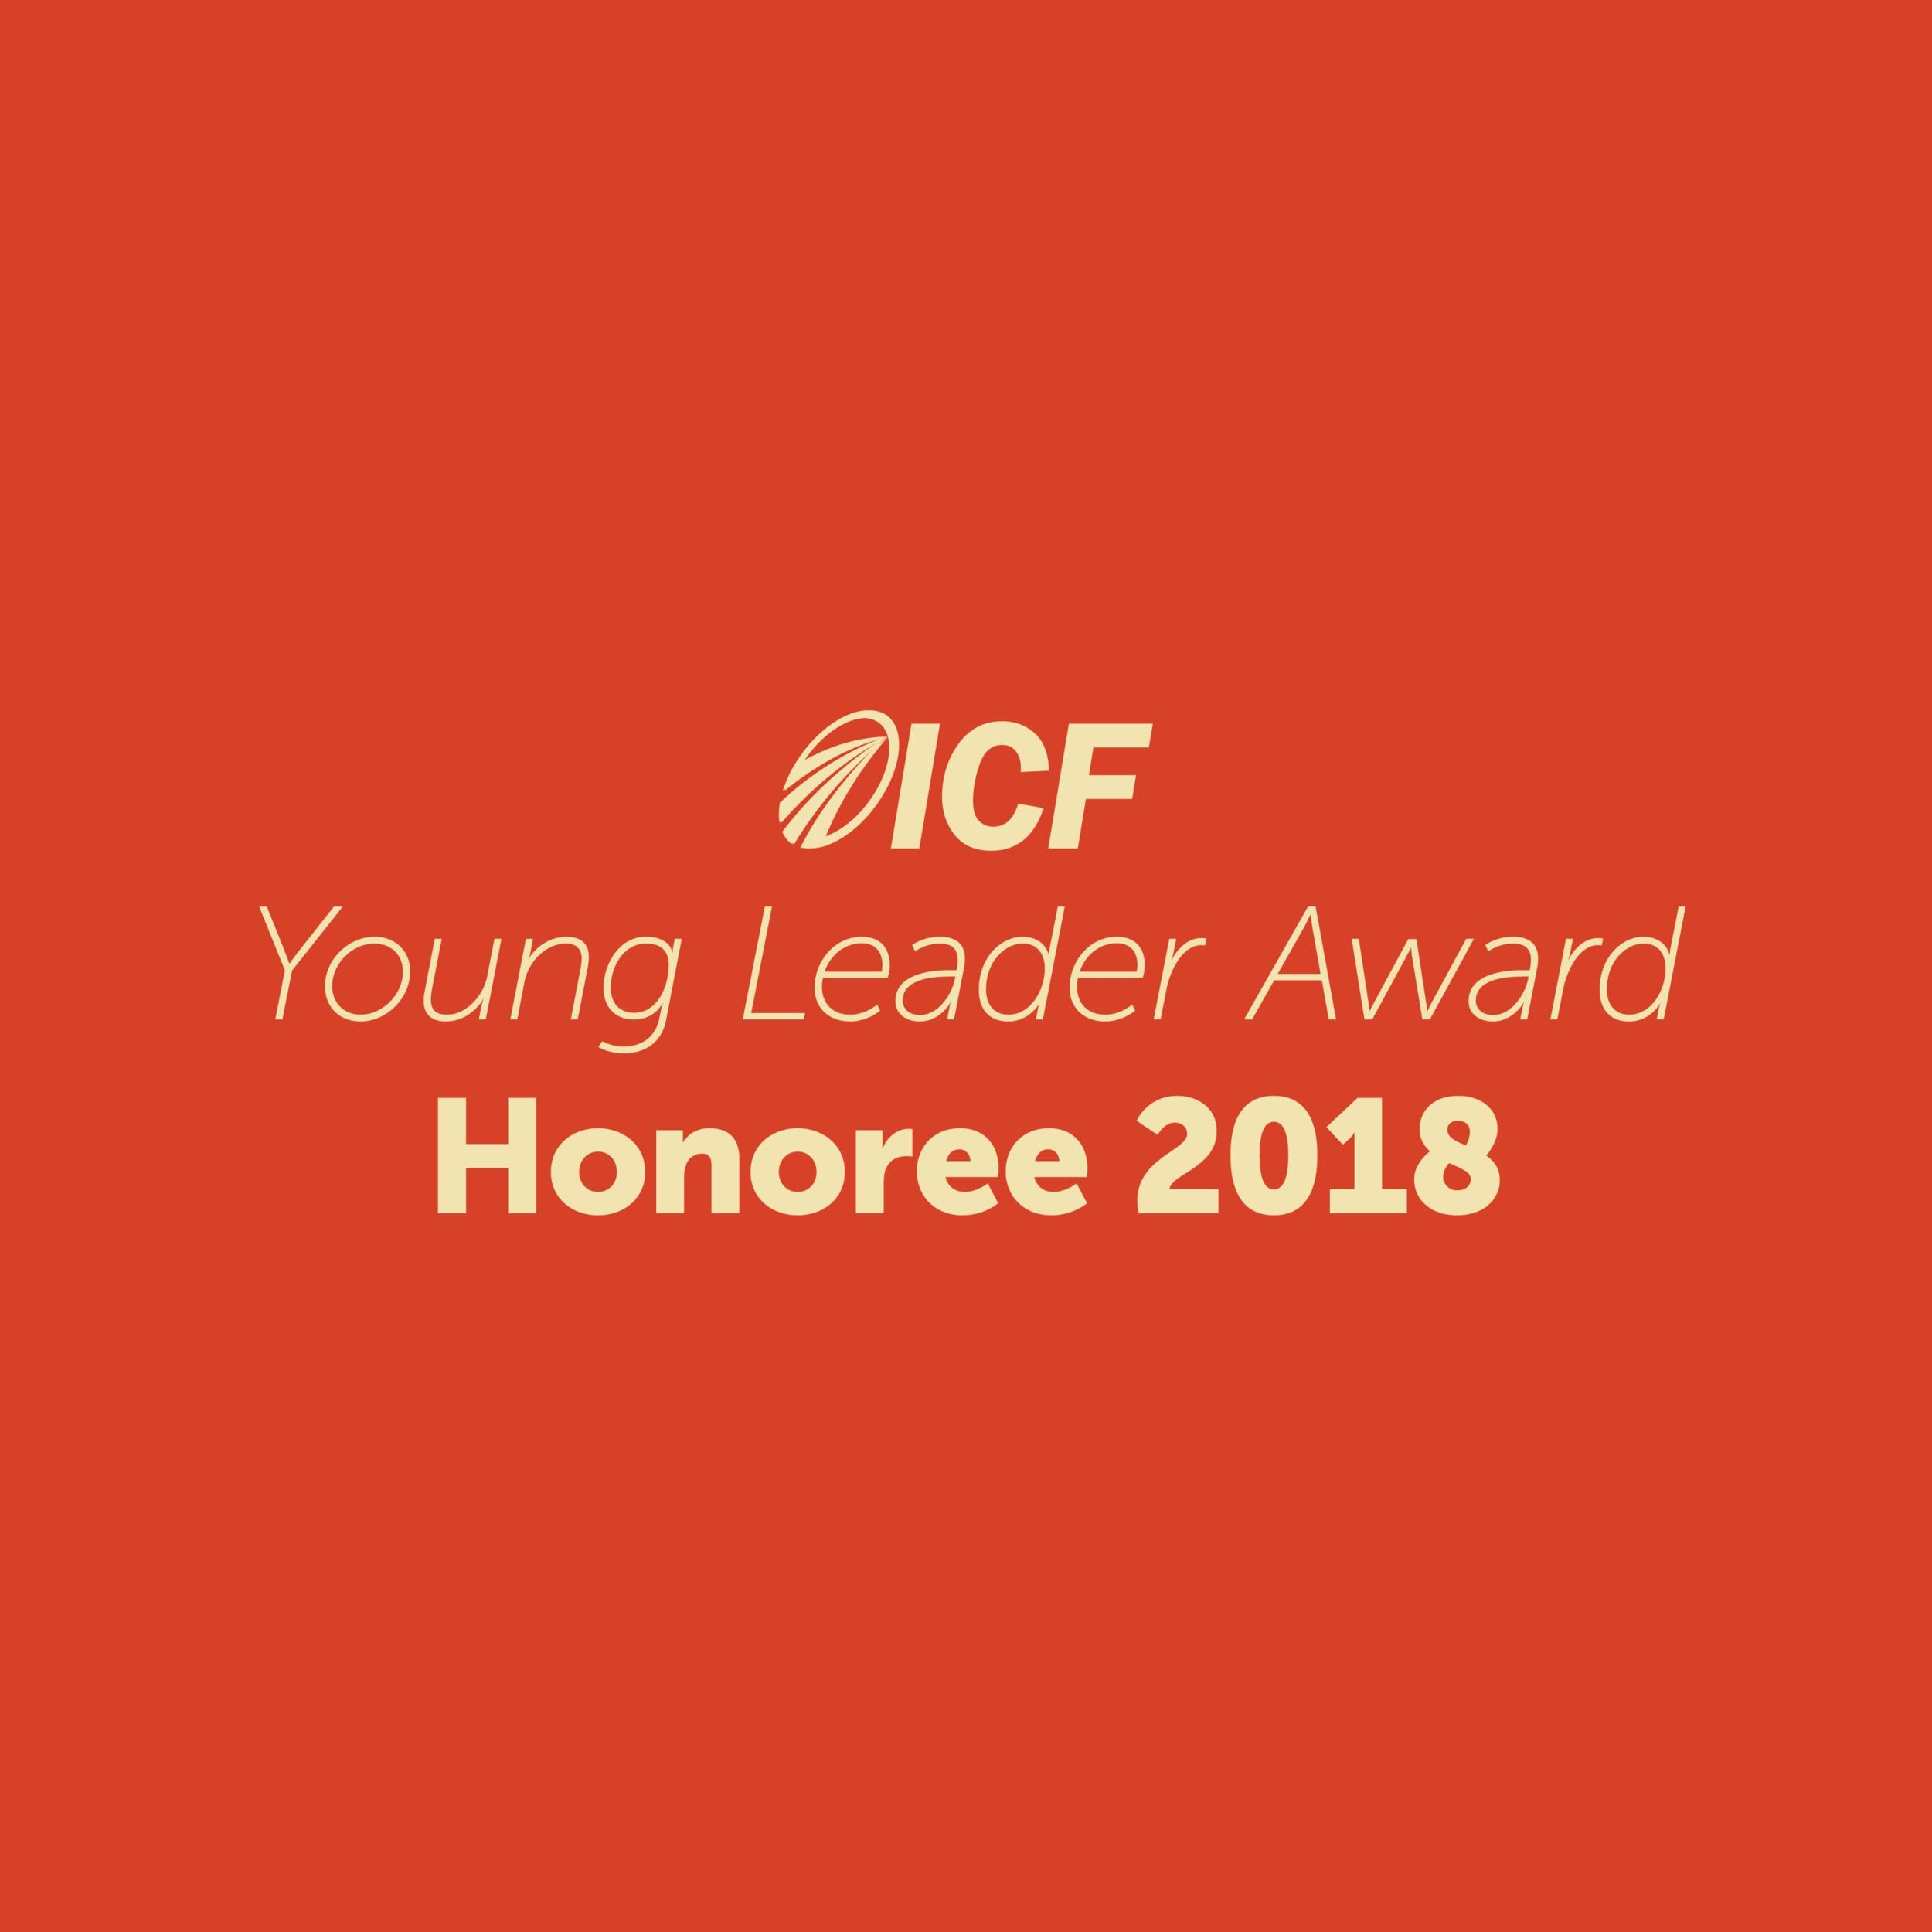 Coach Flame receives Young Leader Award, selected from 33,000 ICF members. 